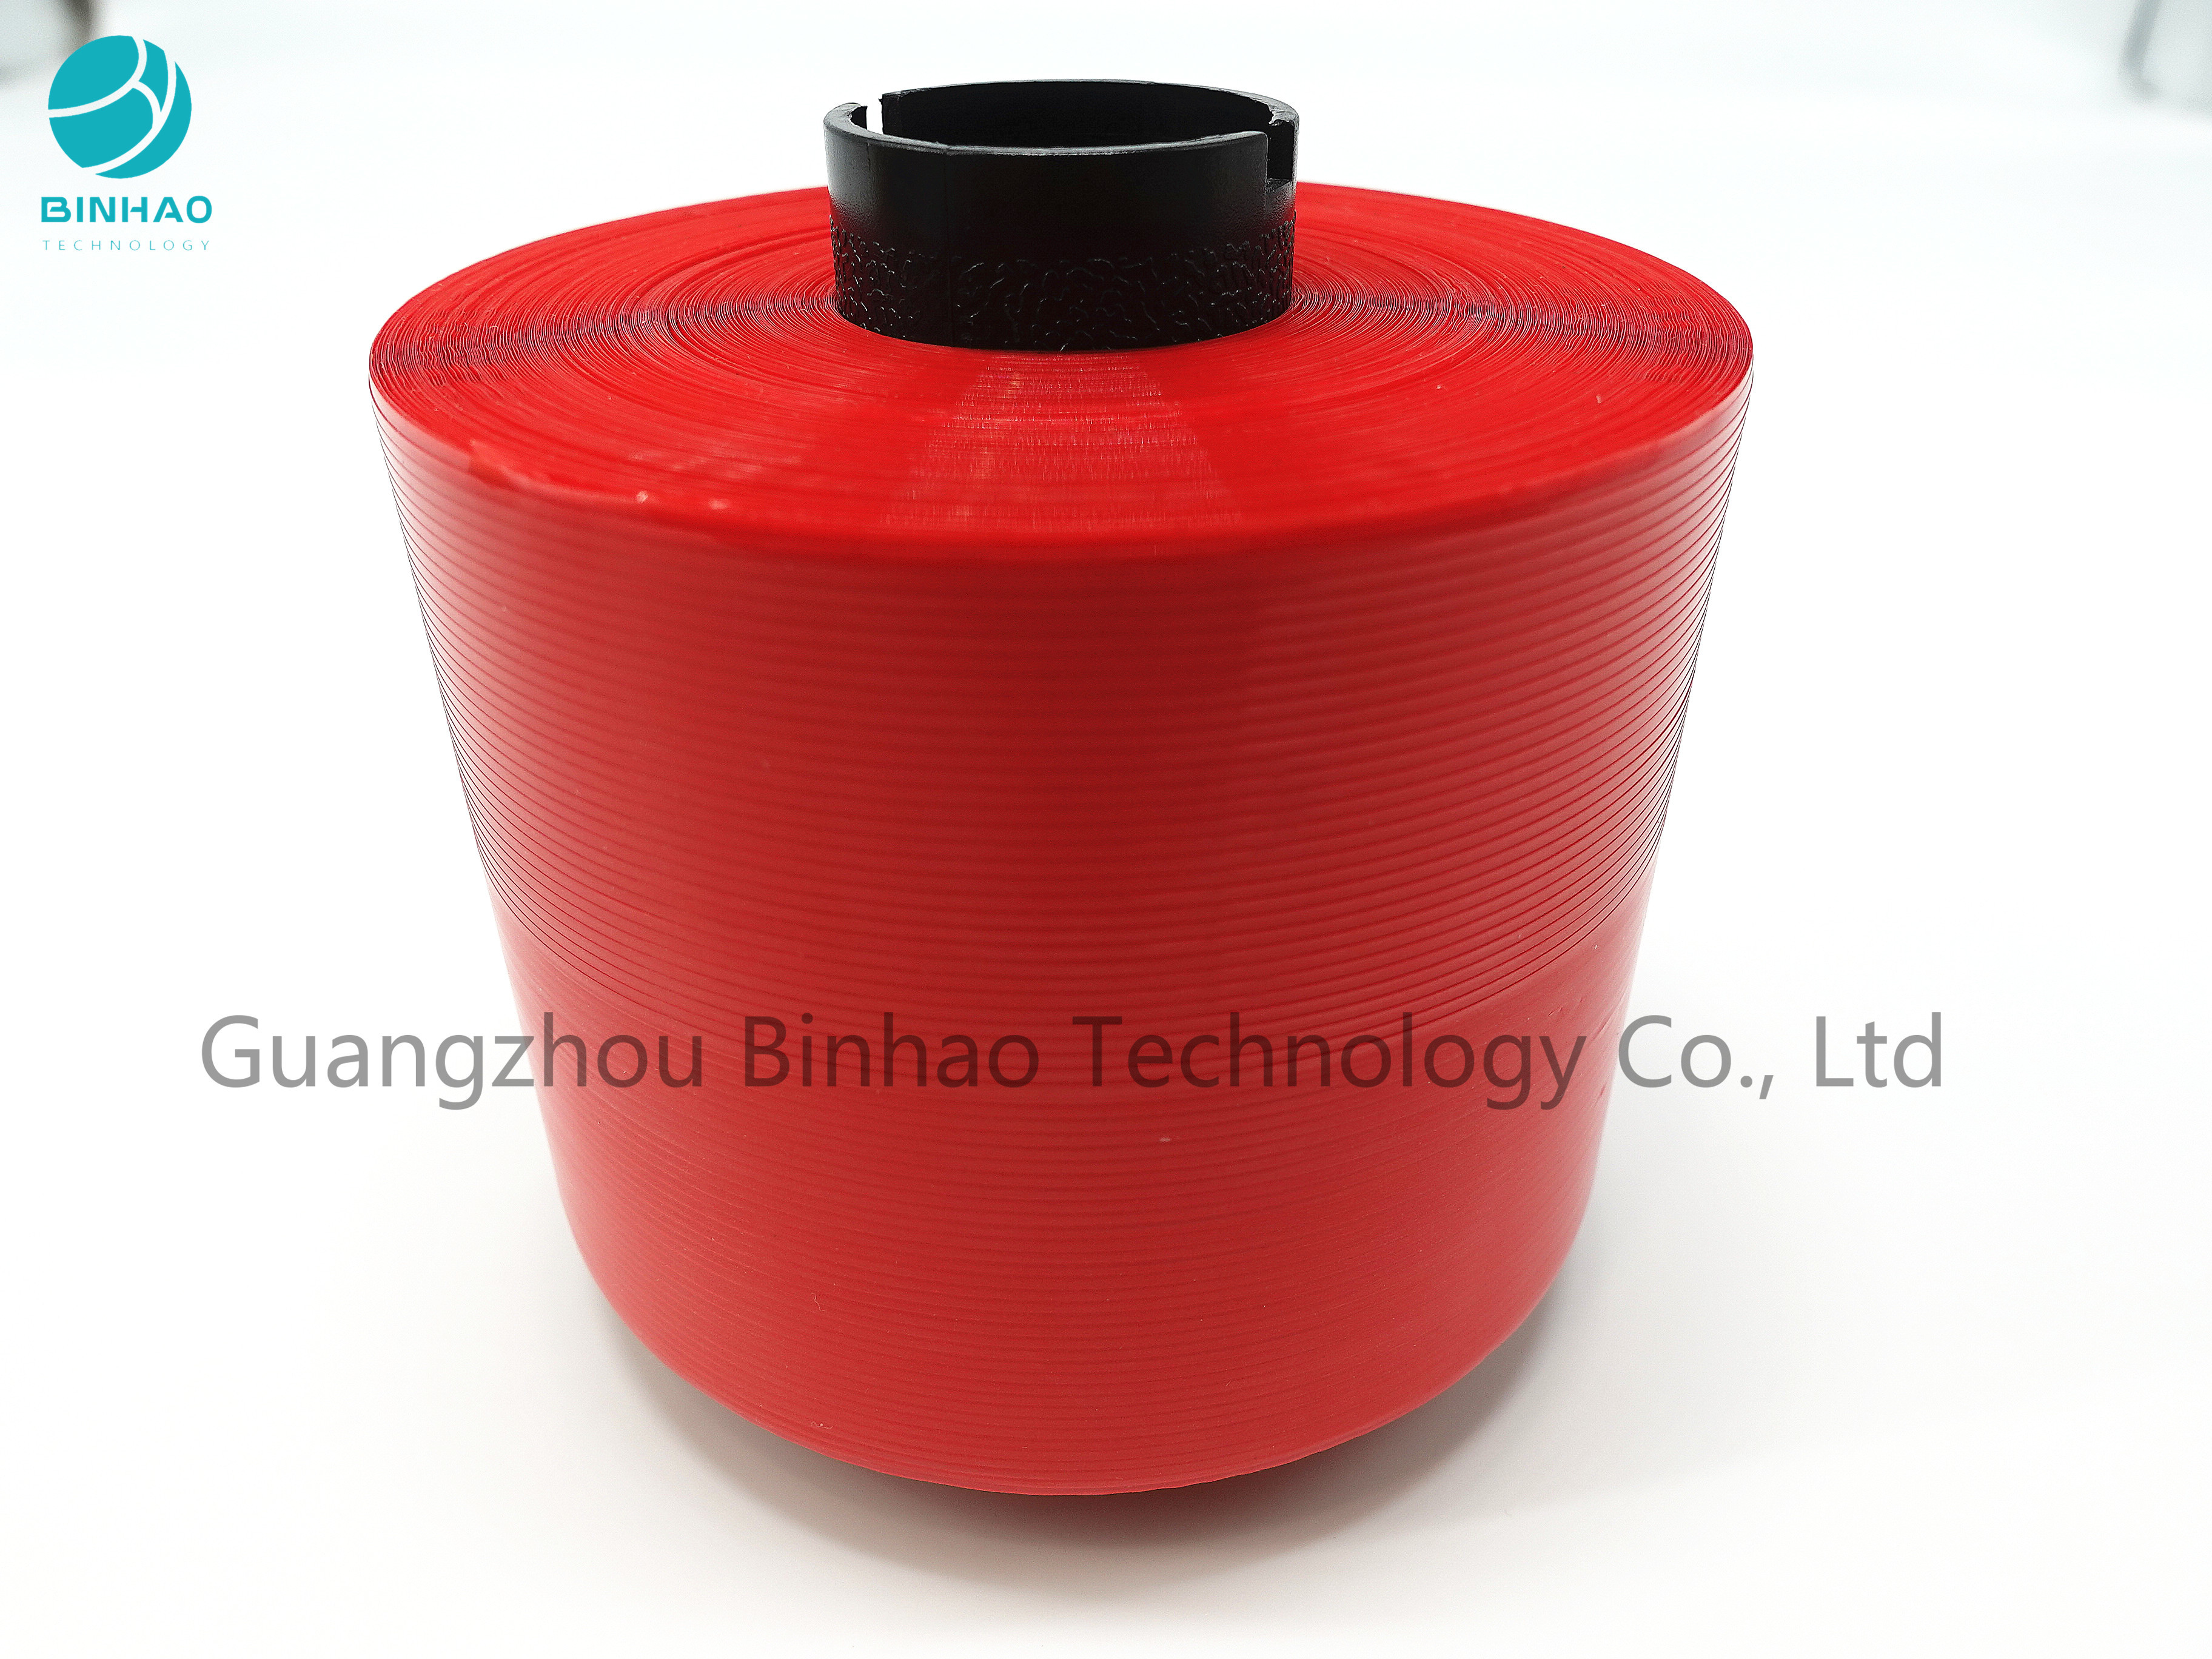 Pure Red Color Easy Open Tear Tape Bobbins For Box Packaging